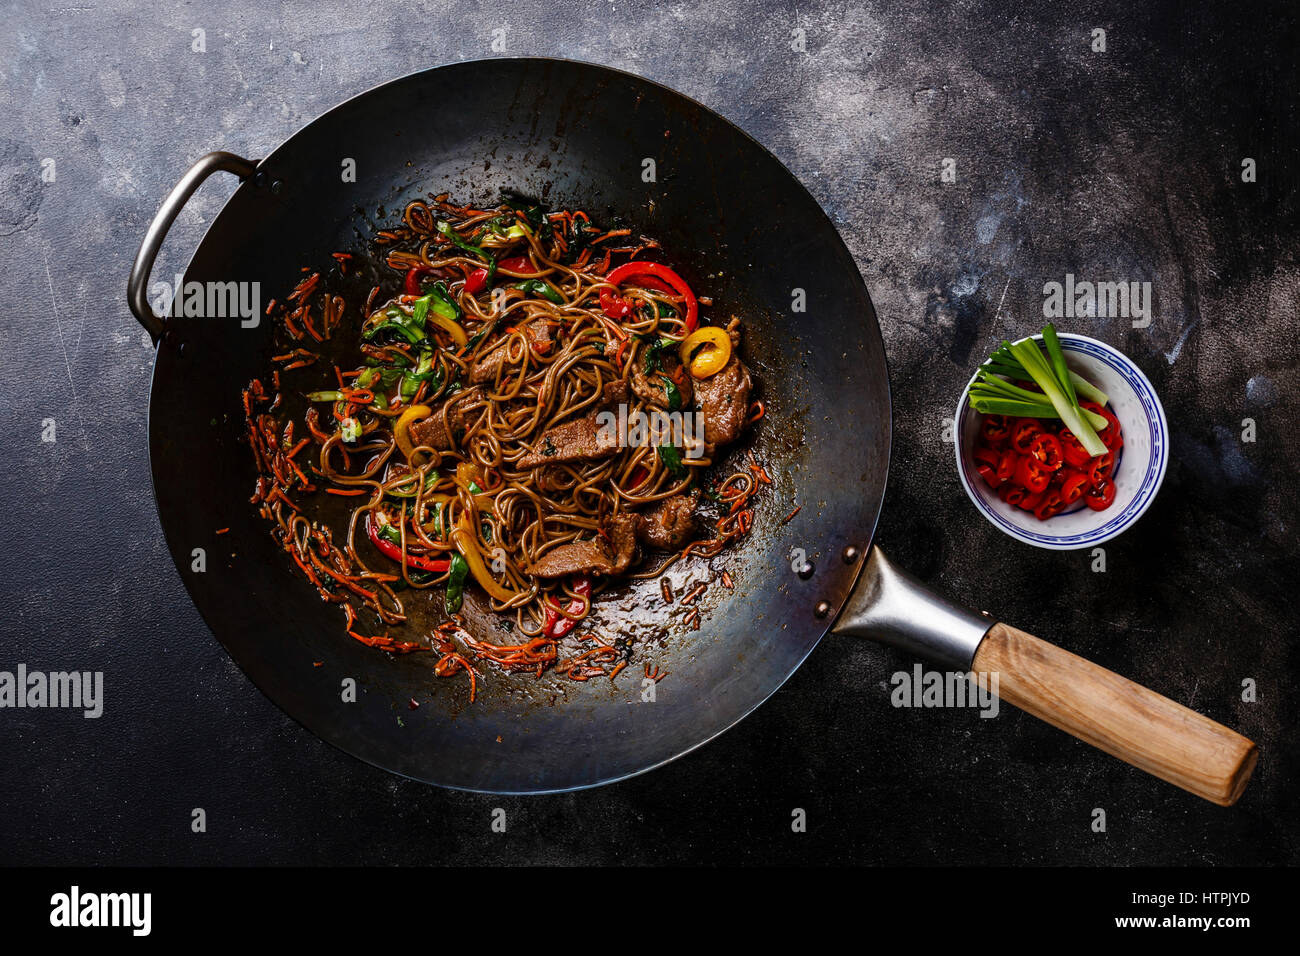 Stir fry noodles Soba with beef and vegetables in wok pan on dark background Stock Photo